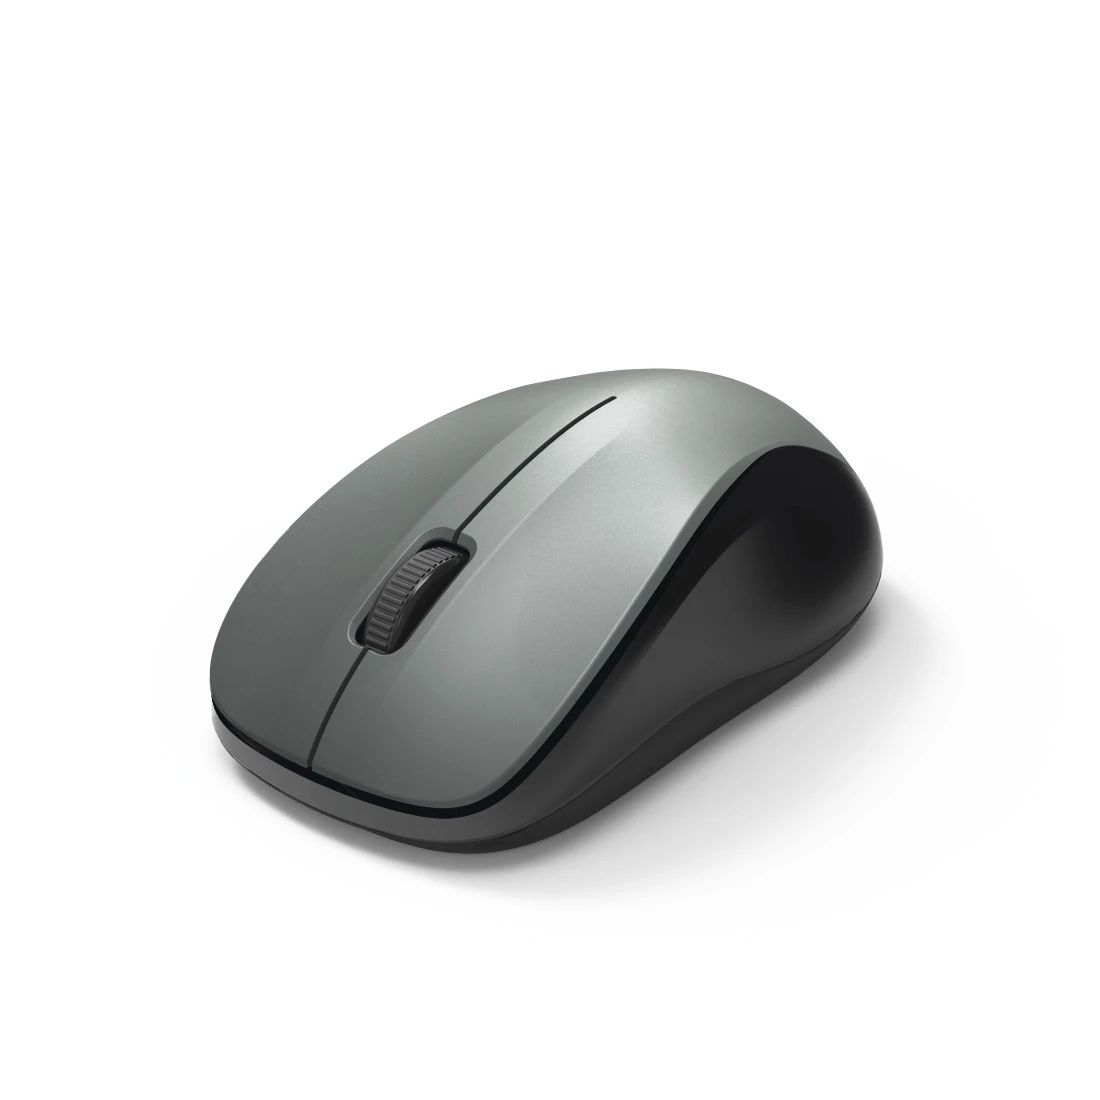 You Recently Viewed Hama 00182621 MW-300 Optical Wireless Mouse, 3 Buttons, anthracite Image